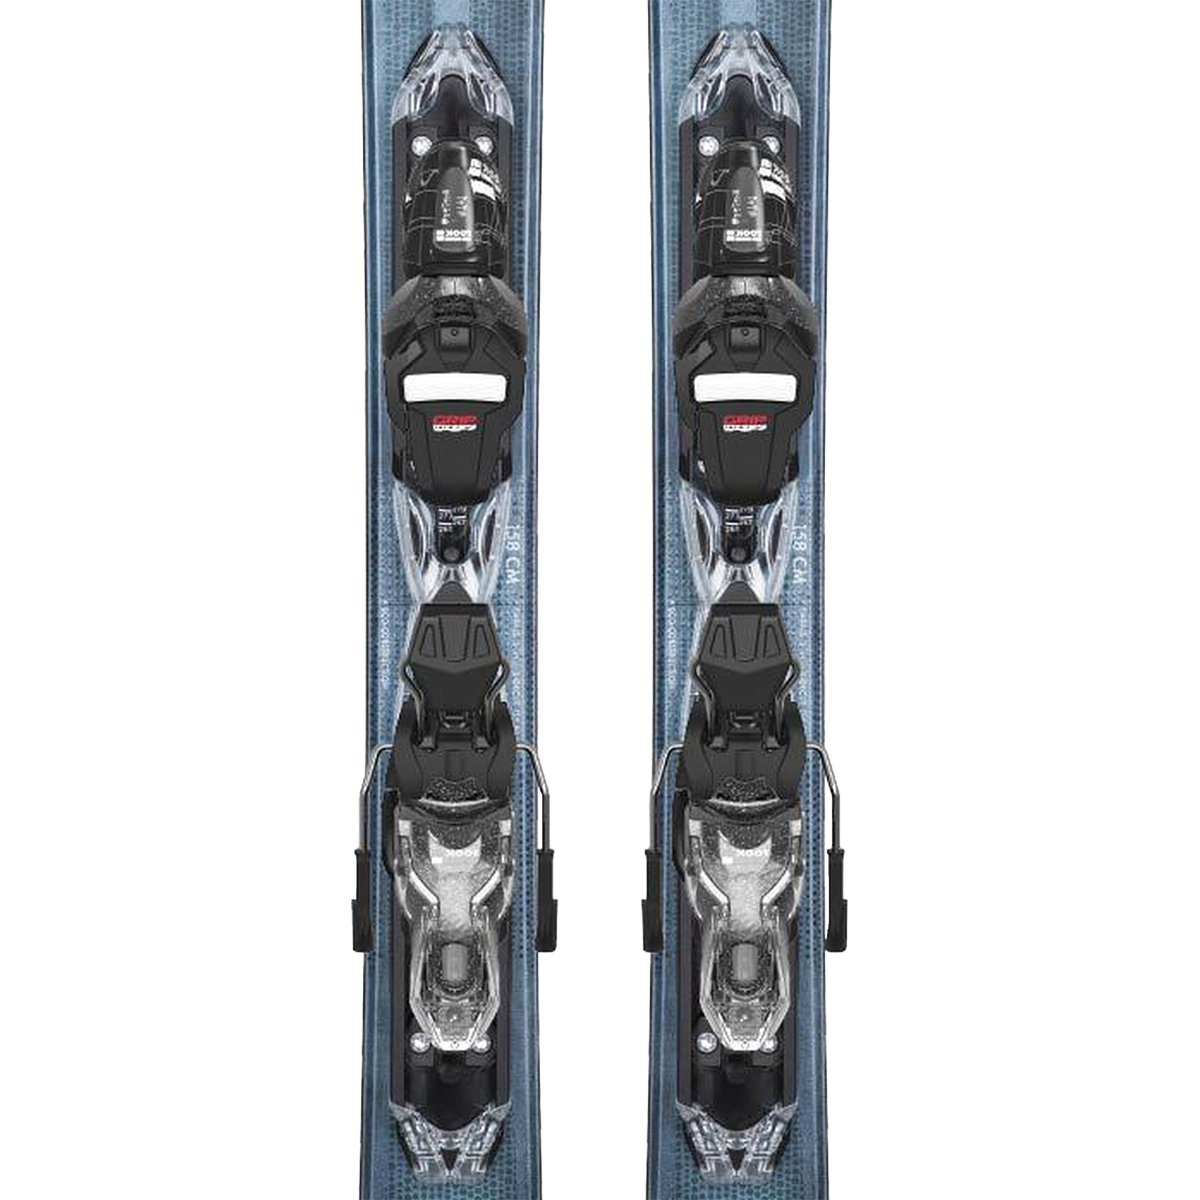 Women's Experience 80 Carbon Ski with Xpress 11 Bindings alternate view